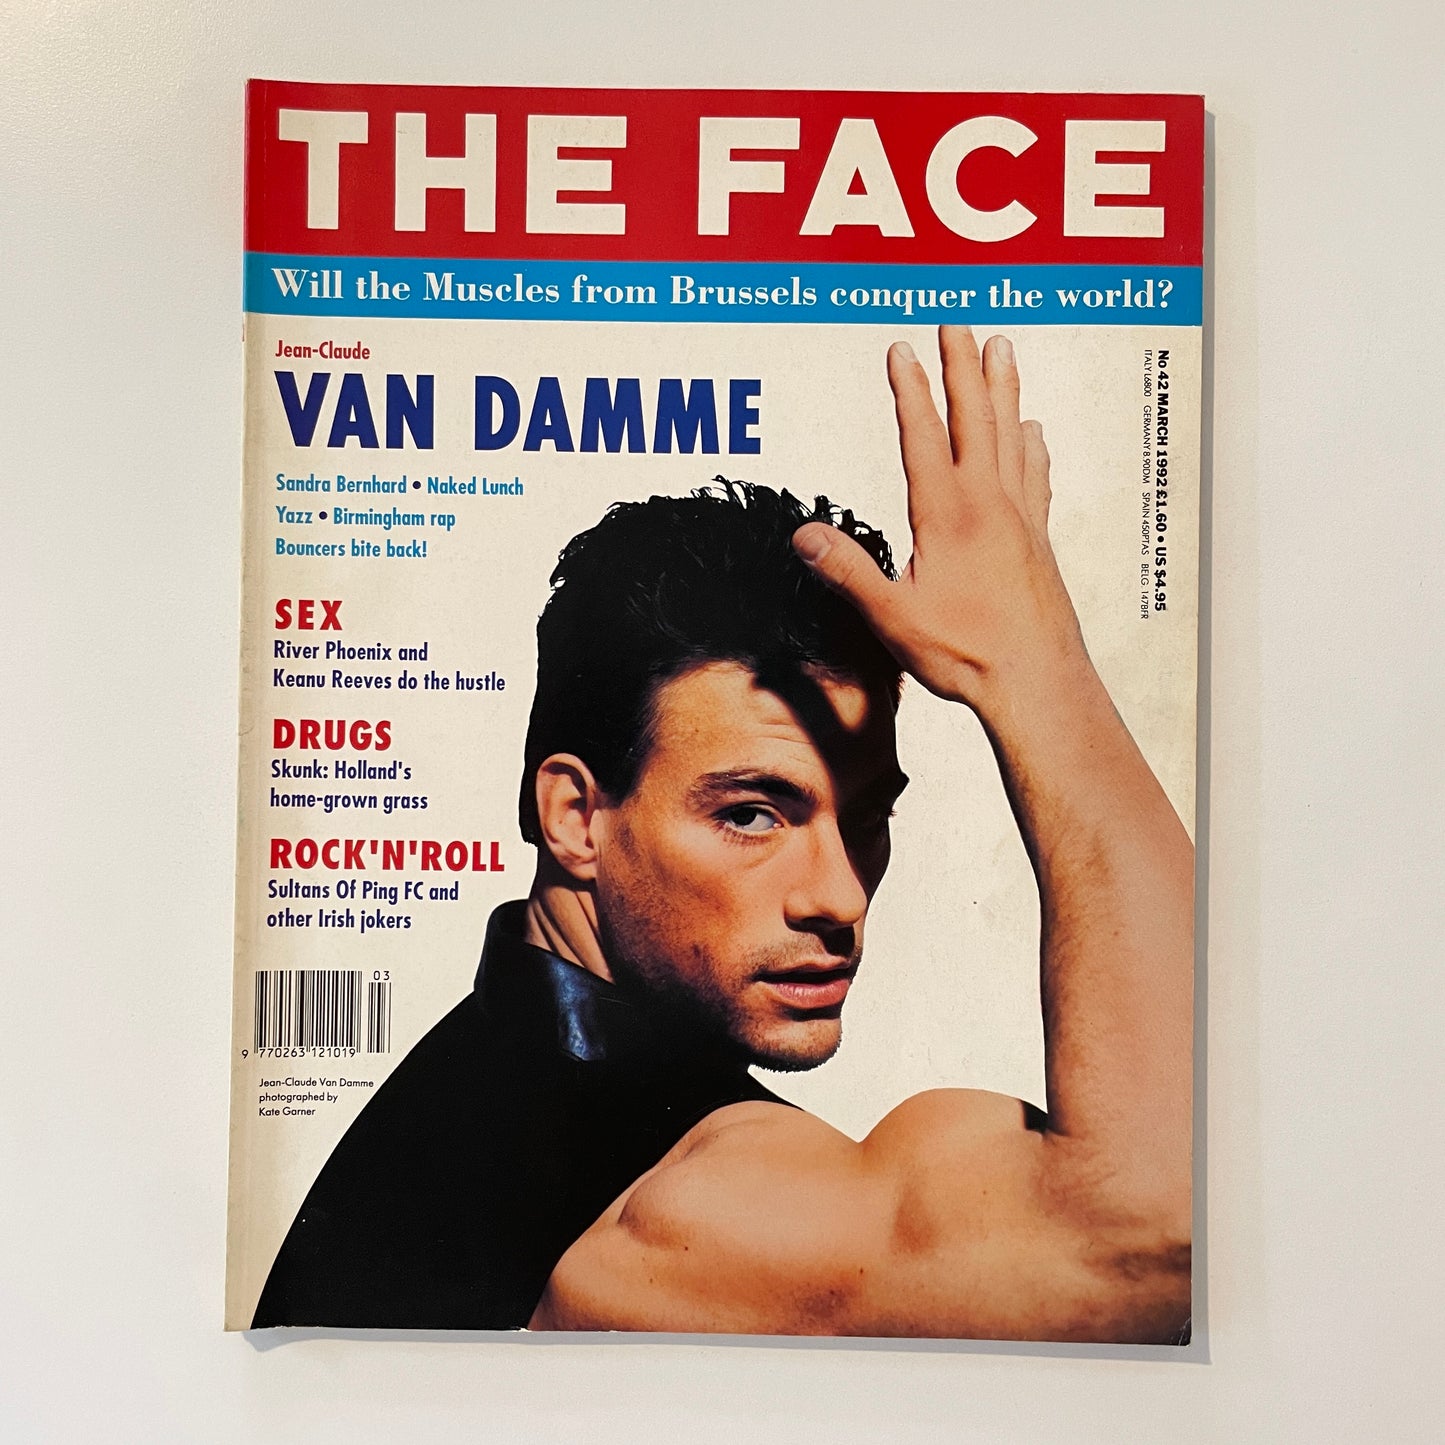 The Face No.42 - March 1992 -Van Damme